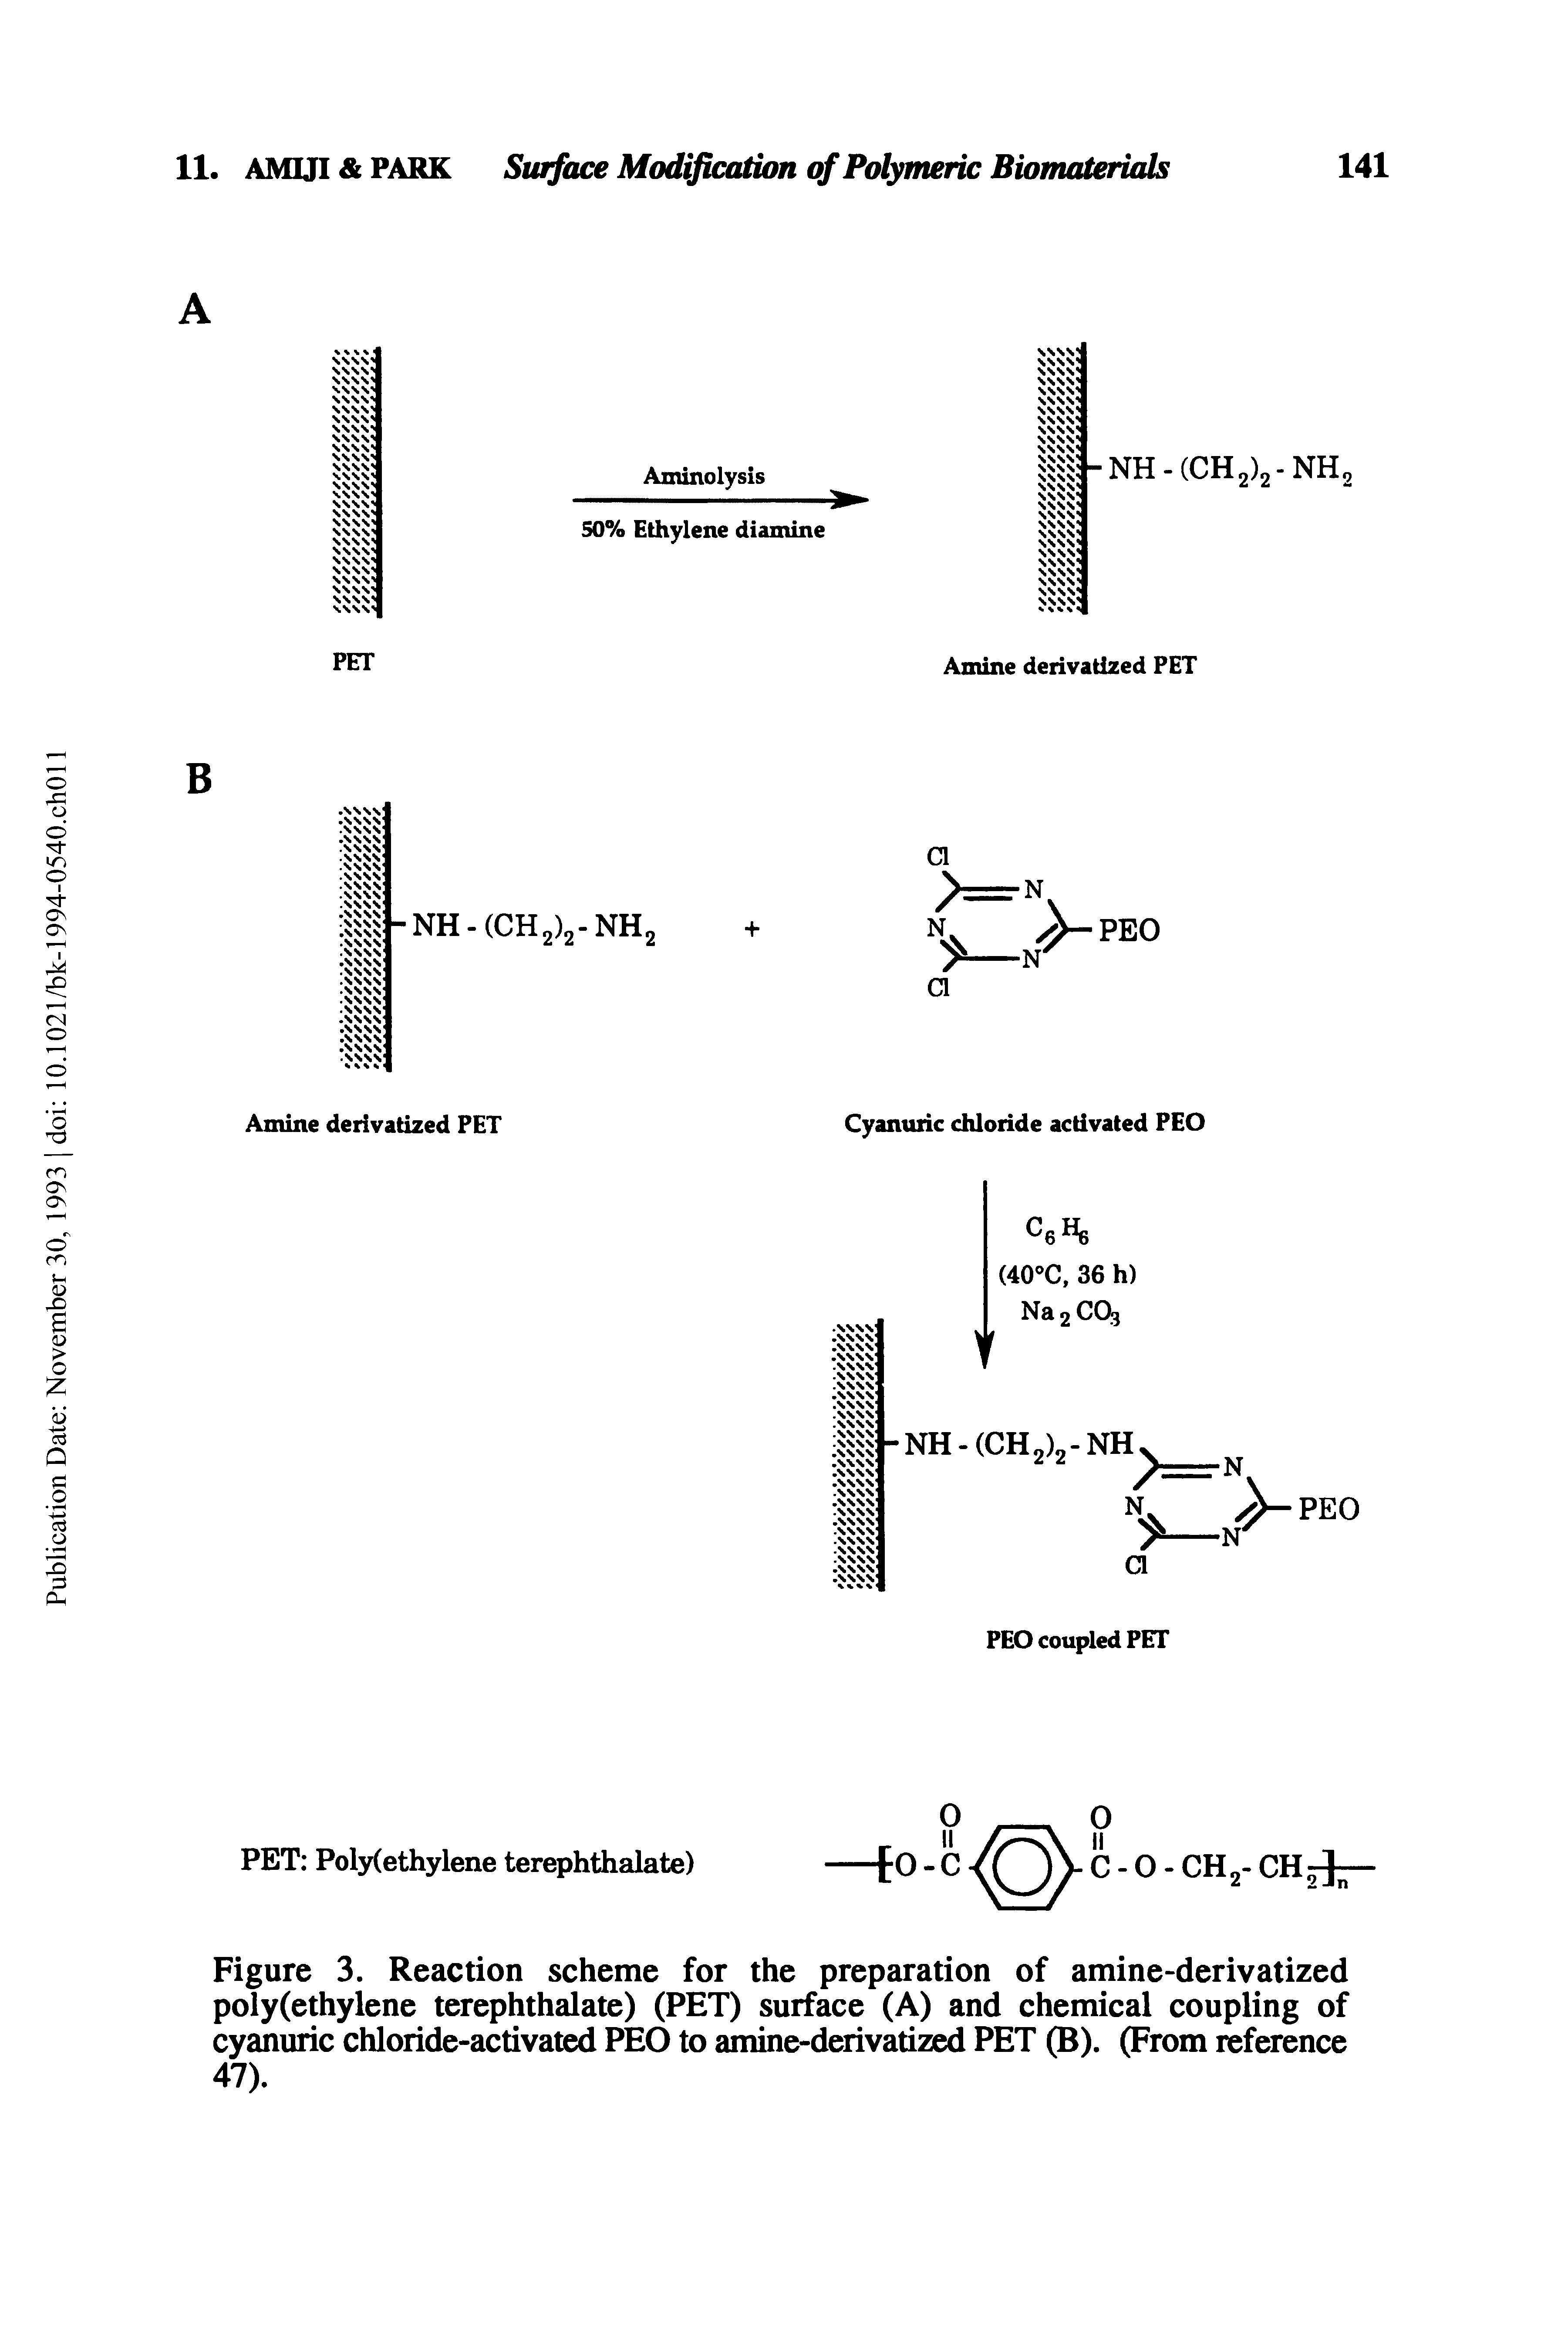 Figure 3. Reaction scheme for the preparation of amine-derivatized poly(ethylene terephthalate) (PET) surface (A) and chemical coupling of cyanuric chloride-activated PEO to amine-derivatized PET (B). (From reference 47).